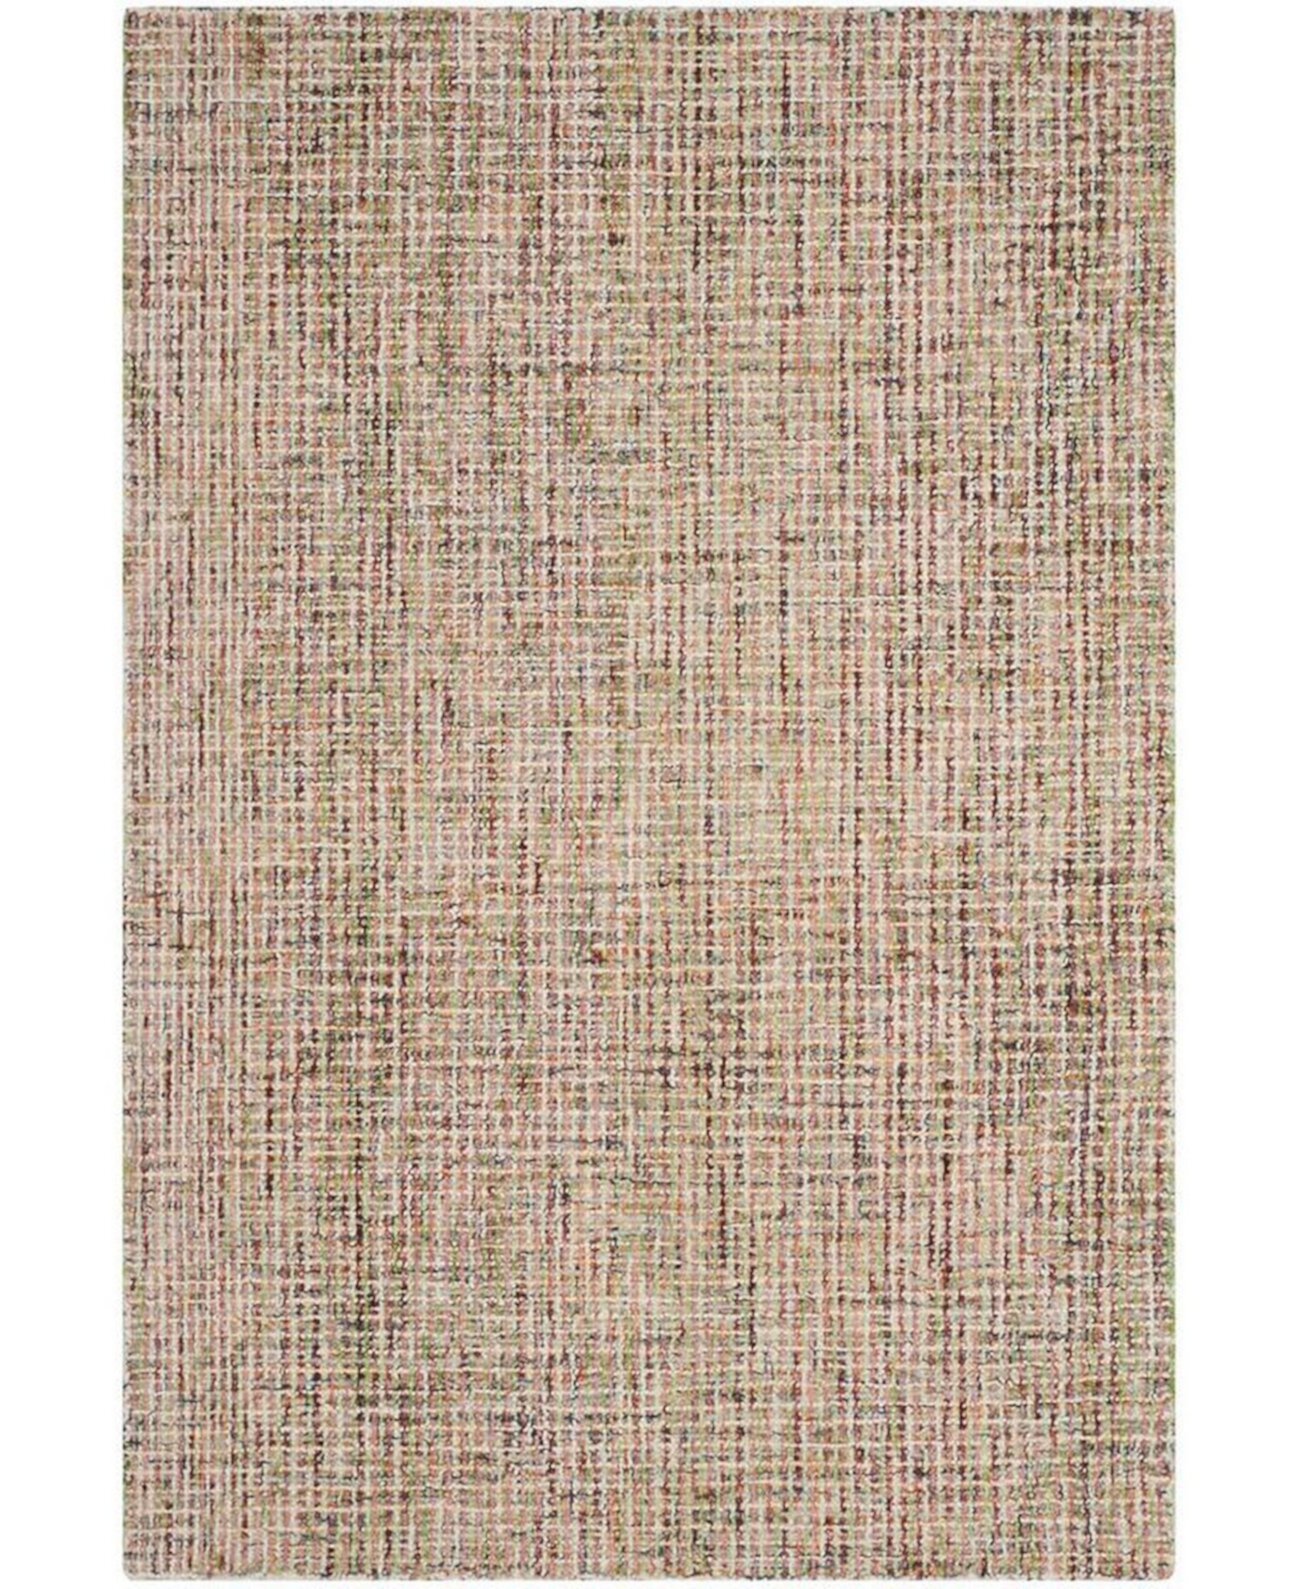 Abstract 468 Gold and Blue 8' x 10' Area Rug Safavieh